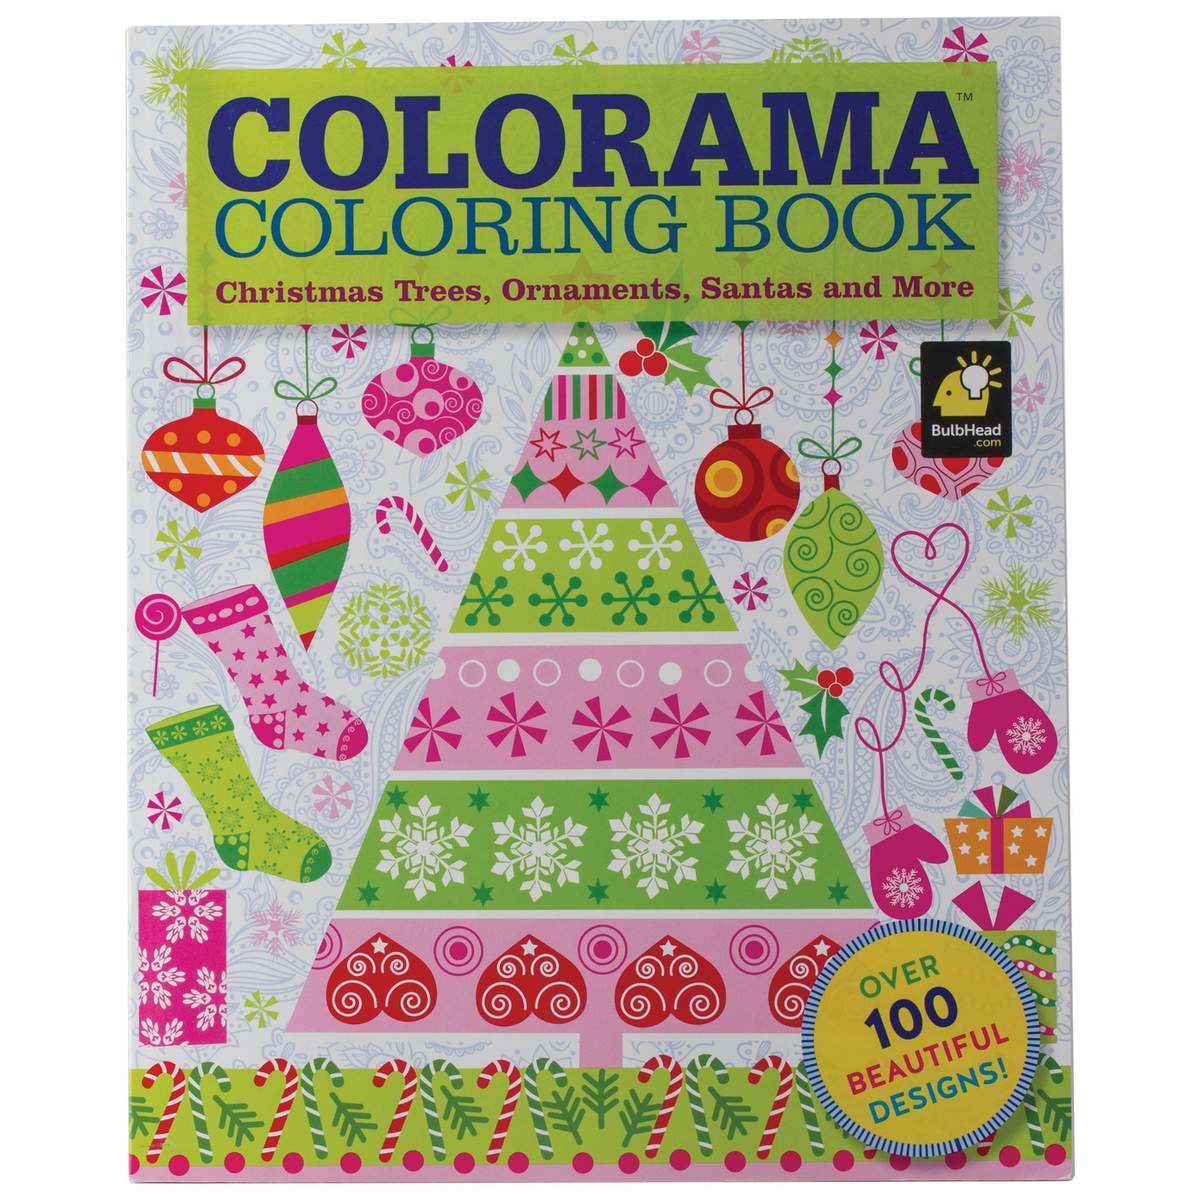 Wholesale Colorama Coloring Book - Christmas Edition(4x.13)